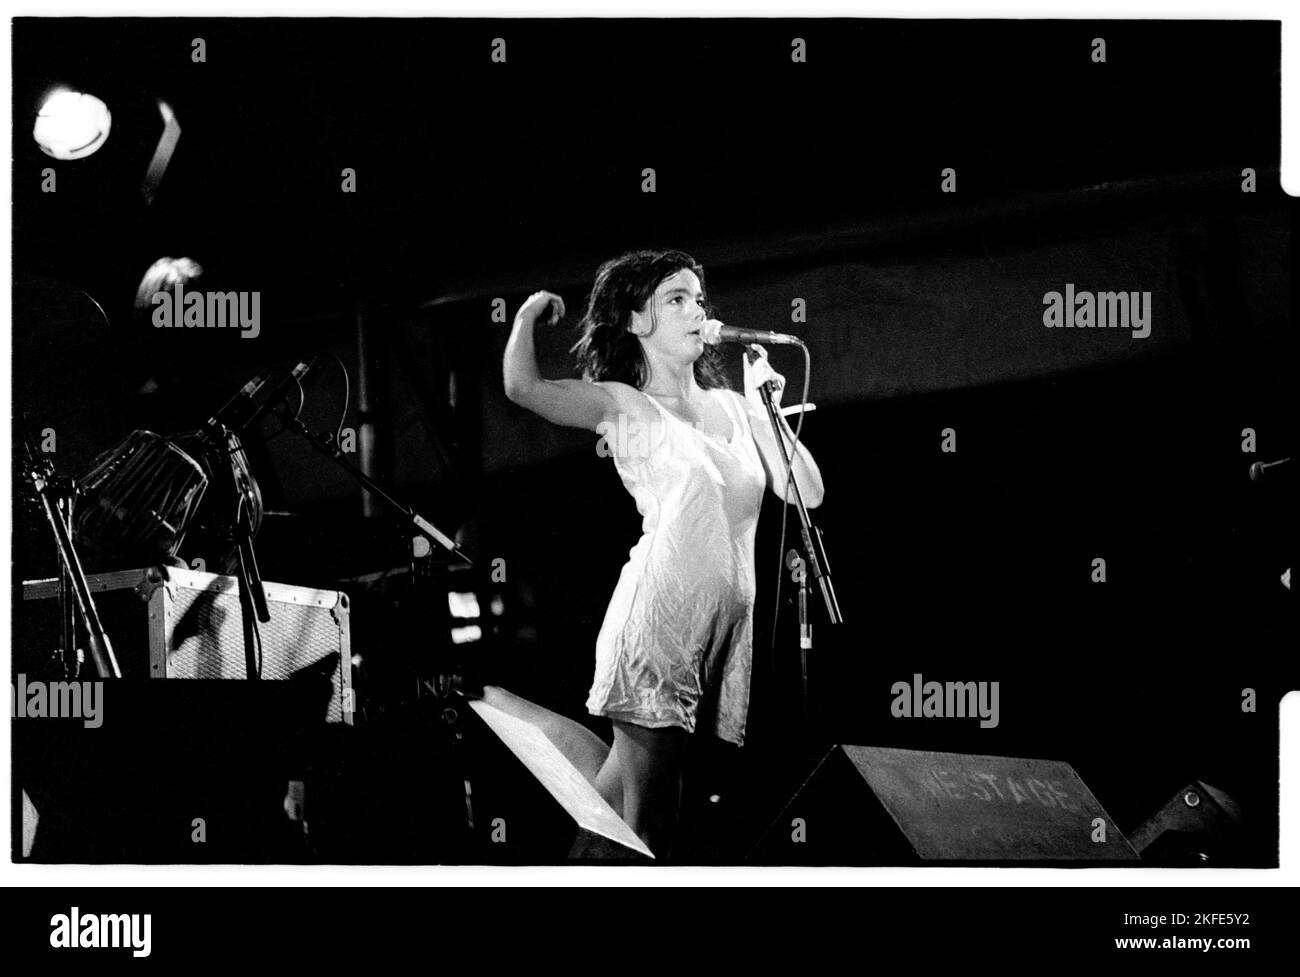 BJÖRK, NME STAGE HEADLINE, GLASTONBURY 94: Björk (Bjork) at the Glastonbury Festival on June 25 1994 as headliner on the NME Stage, Pilton Farm, England. Photograph: Rob Watkins.  INFO: Björk is an Icelandic singer, songwriter, and actress known for her eclectic and innovative music. Emerging as the lead singer of The Sugarcubes, she achieved global fame with her solo career, producing acclaimed albums like 'Debut,' 'Homogenic,' and 'Vespertine.' Stock Photo